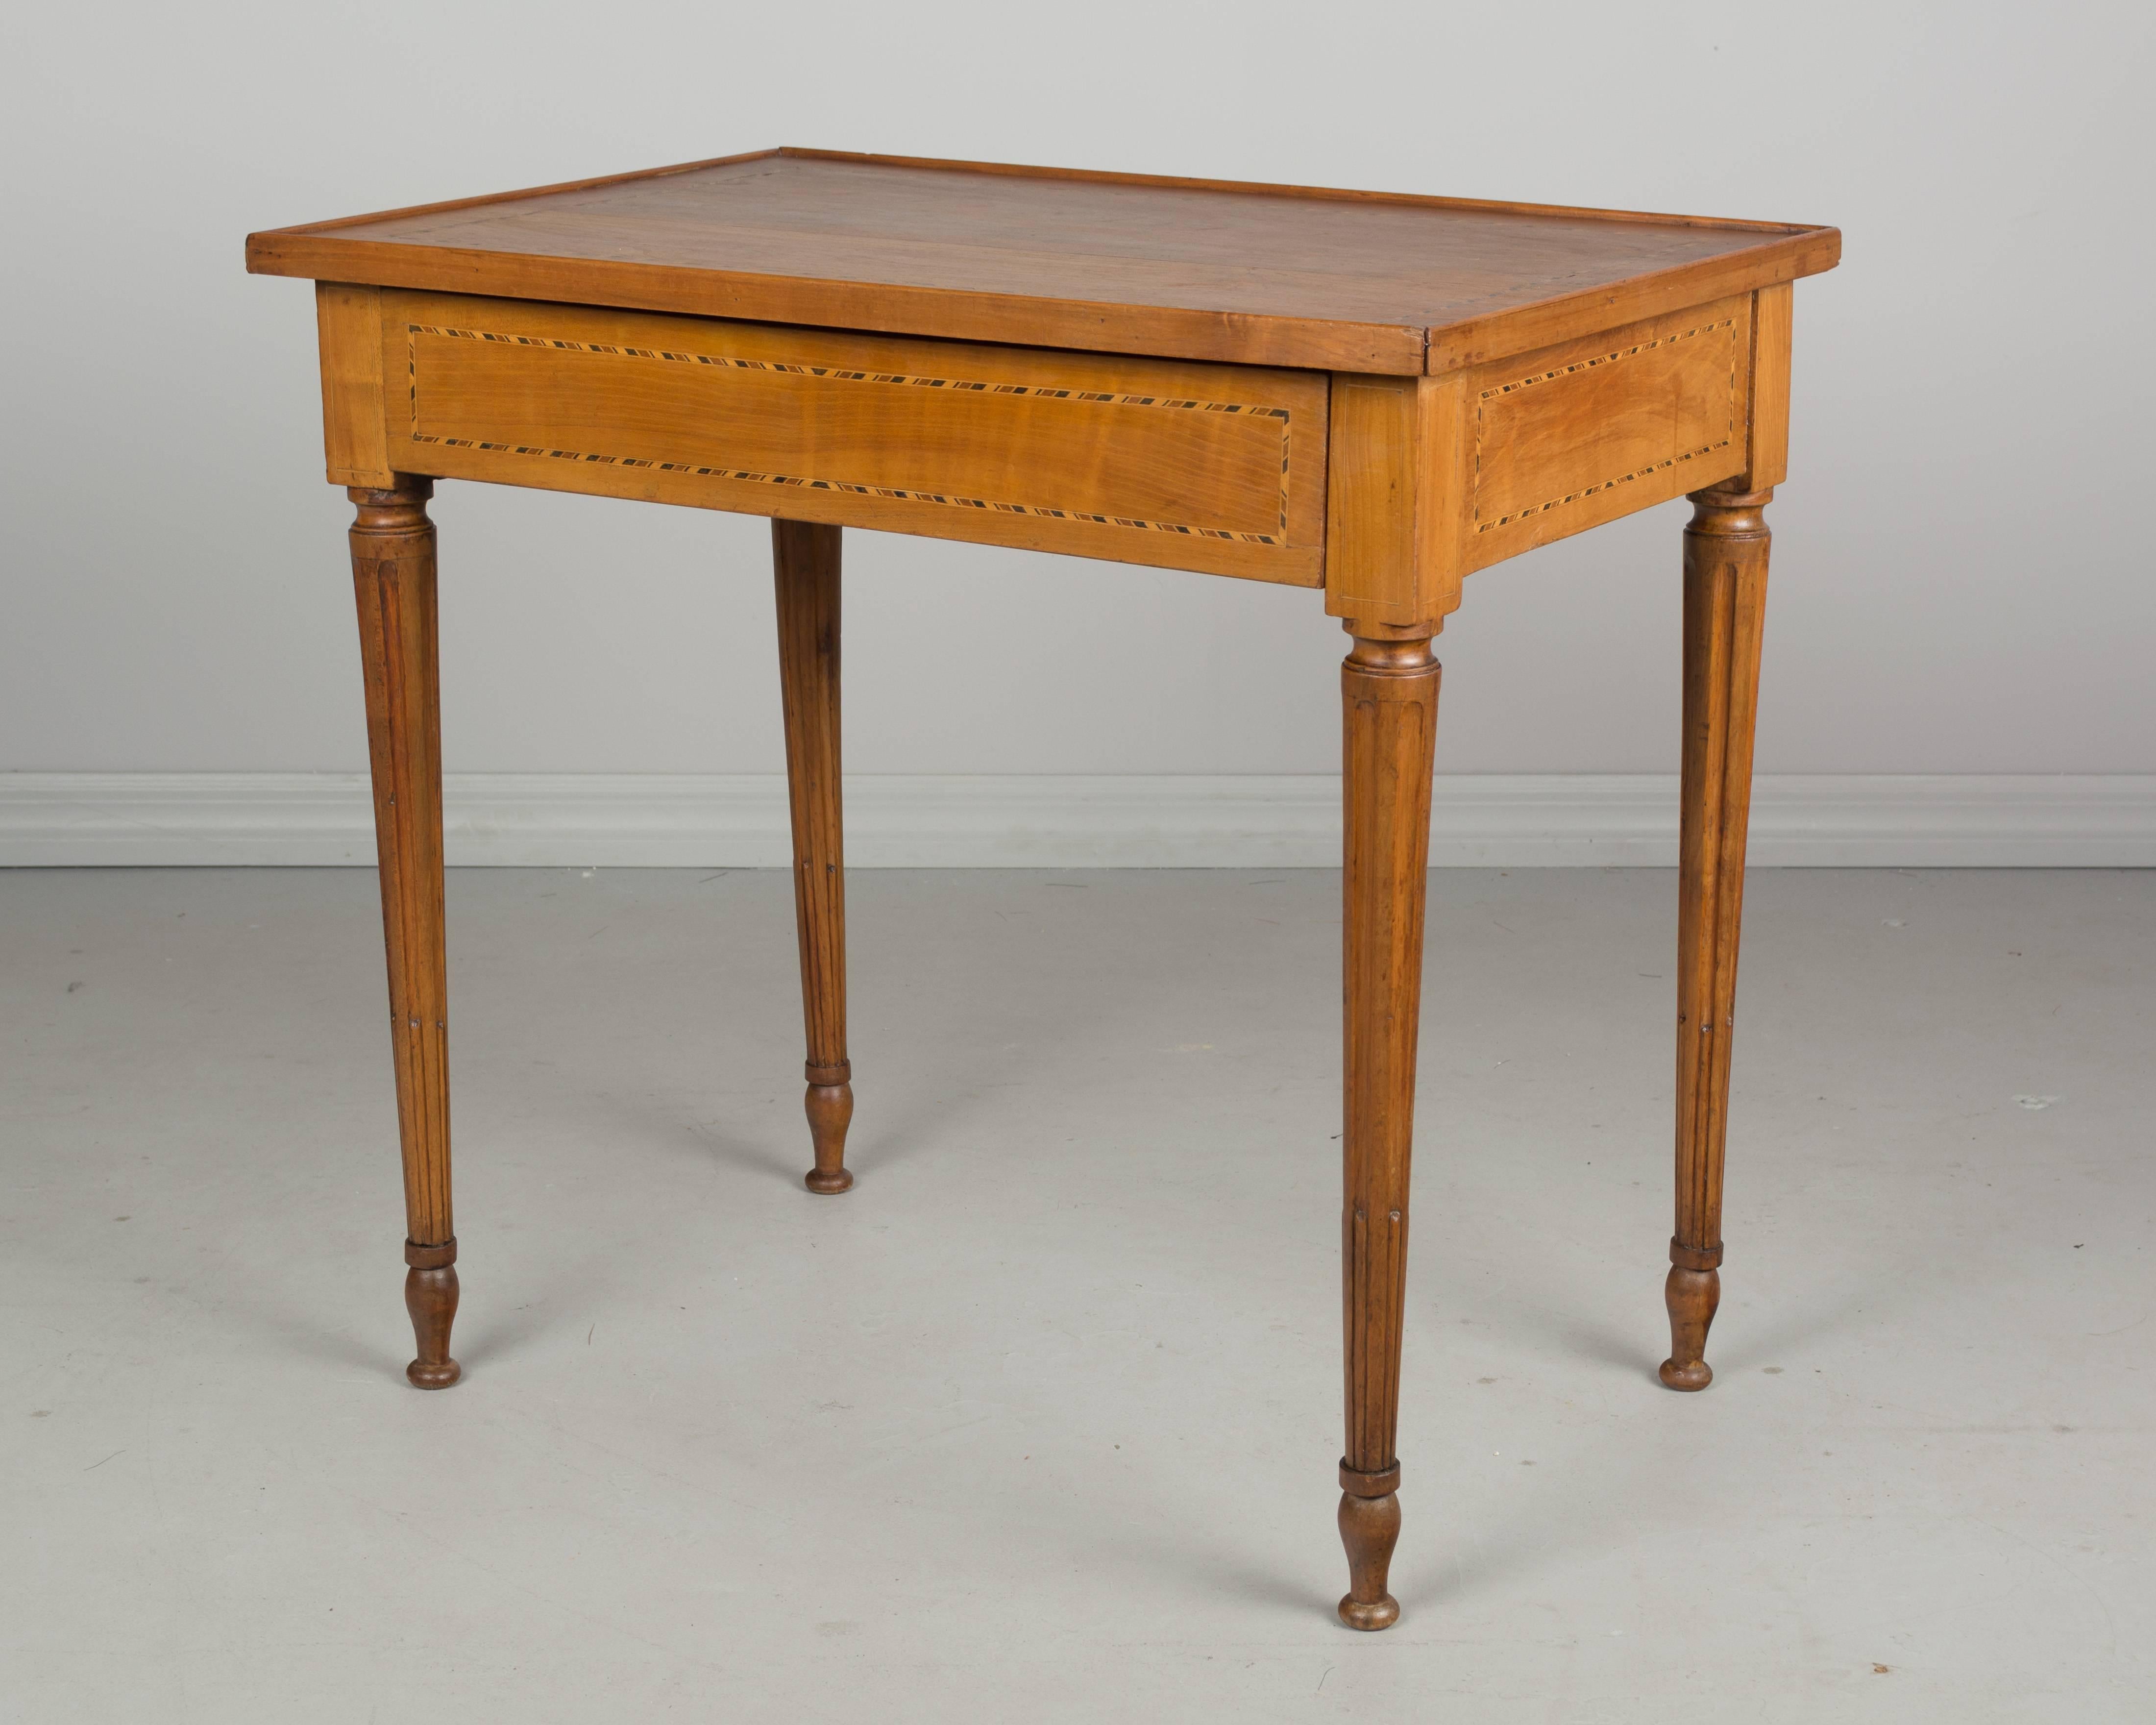 A 19th century French Louis XVI style side table made of cherrywood with inlay detail, fluted legs and a single drawer. Restoration on the bottom of the legs. More photos available upon request. We have a large selection of French antiques at